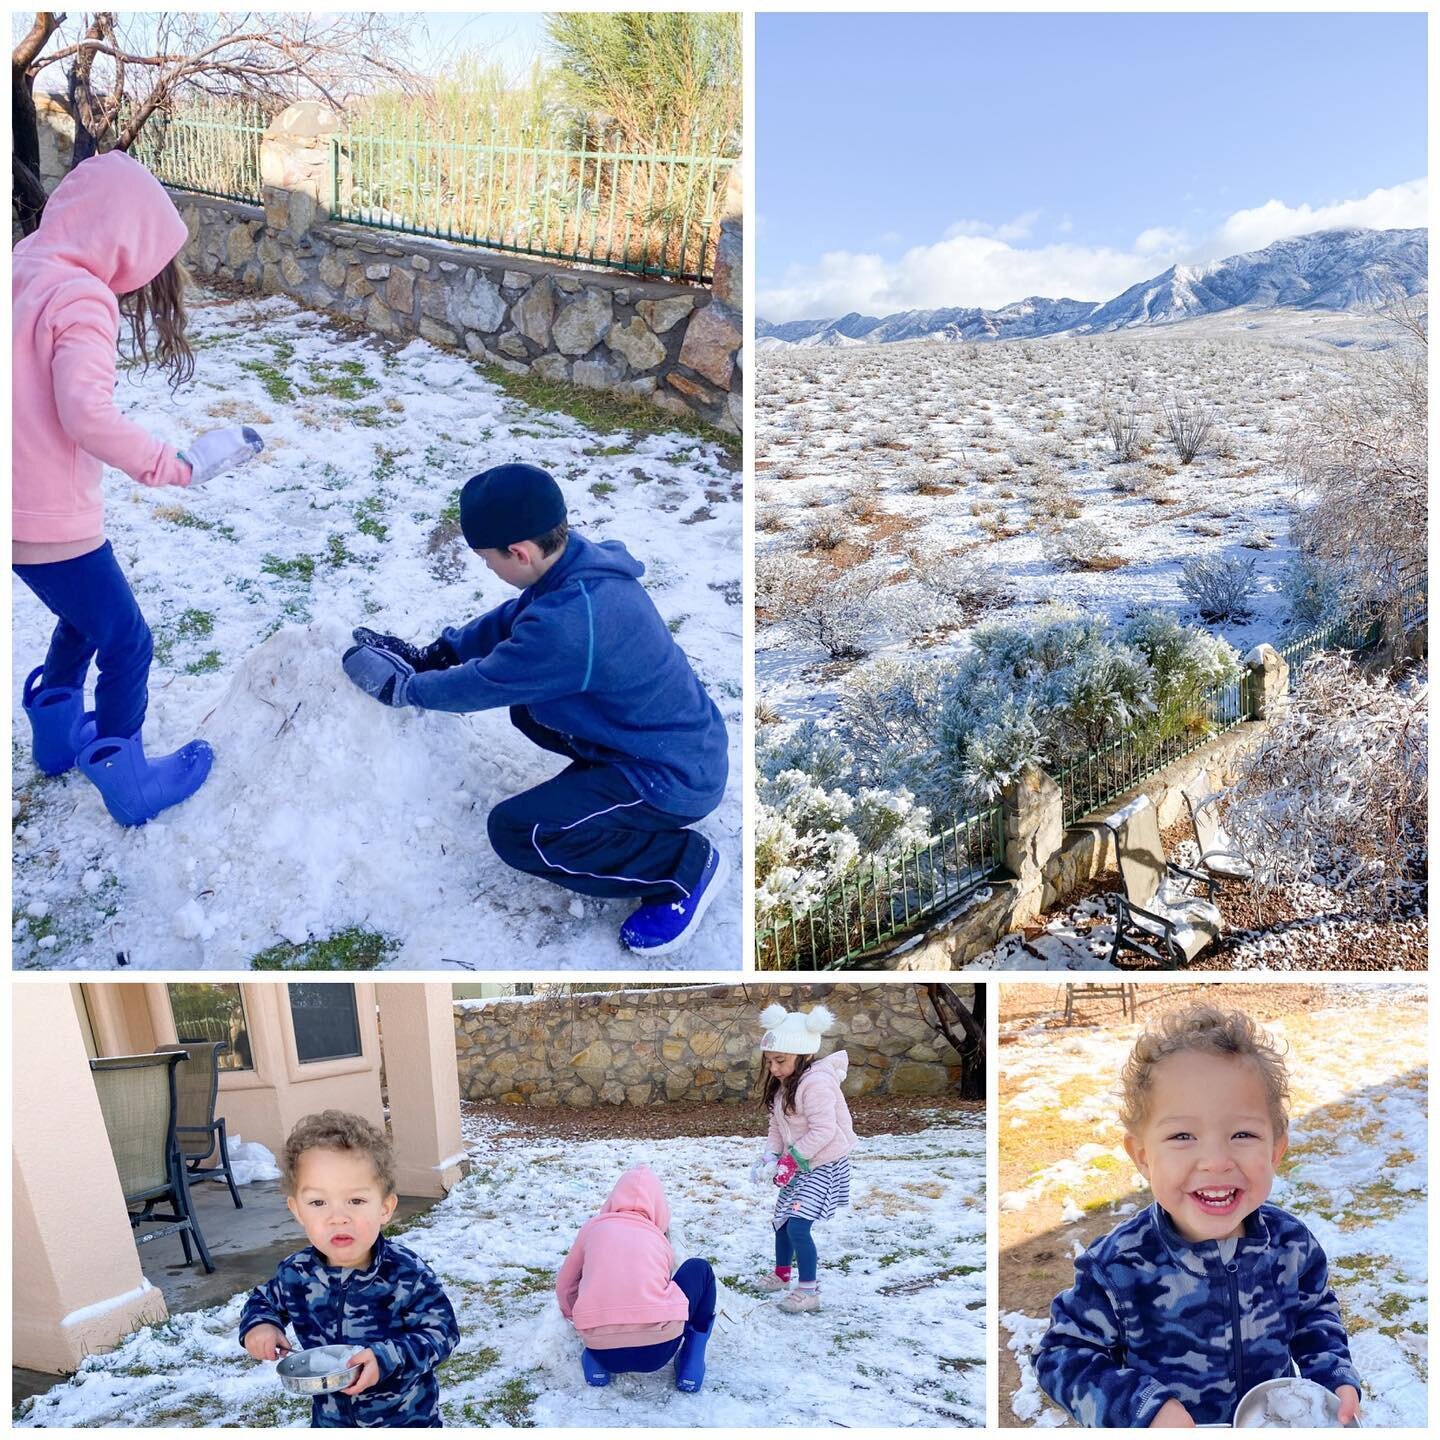 Even if you try to stop them in time, some children end up eating dirt or beach sand. Today it was snow, and he has the smile to prove it. #elpaso #giantsnowtruffles 😂